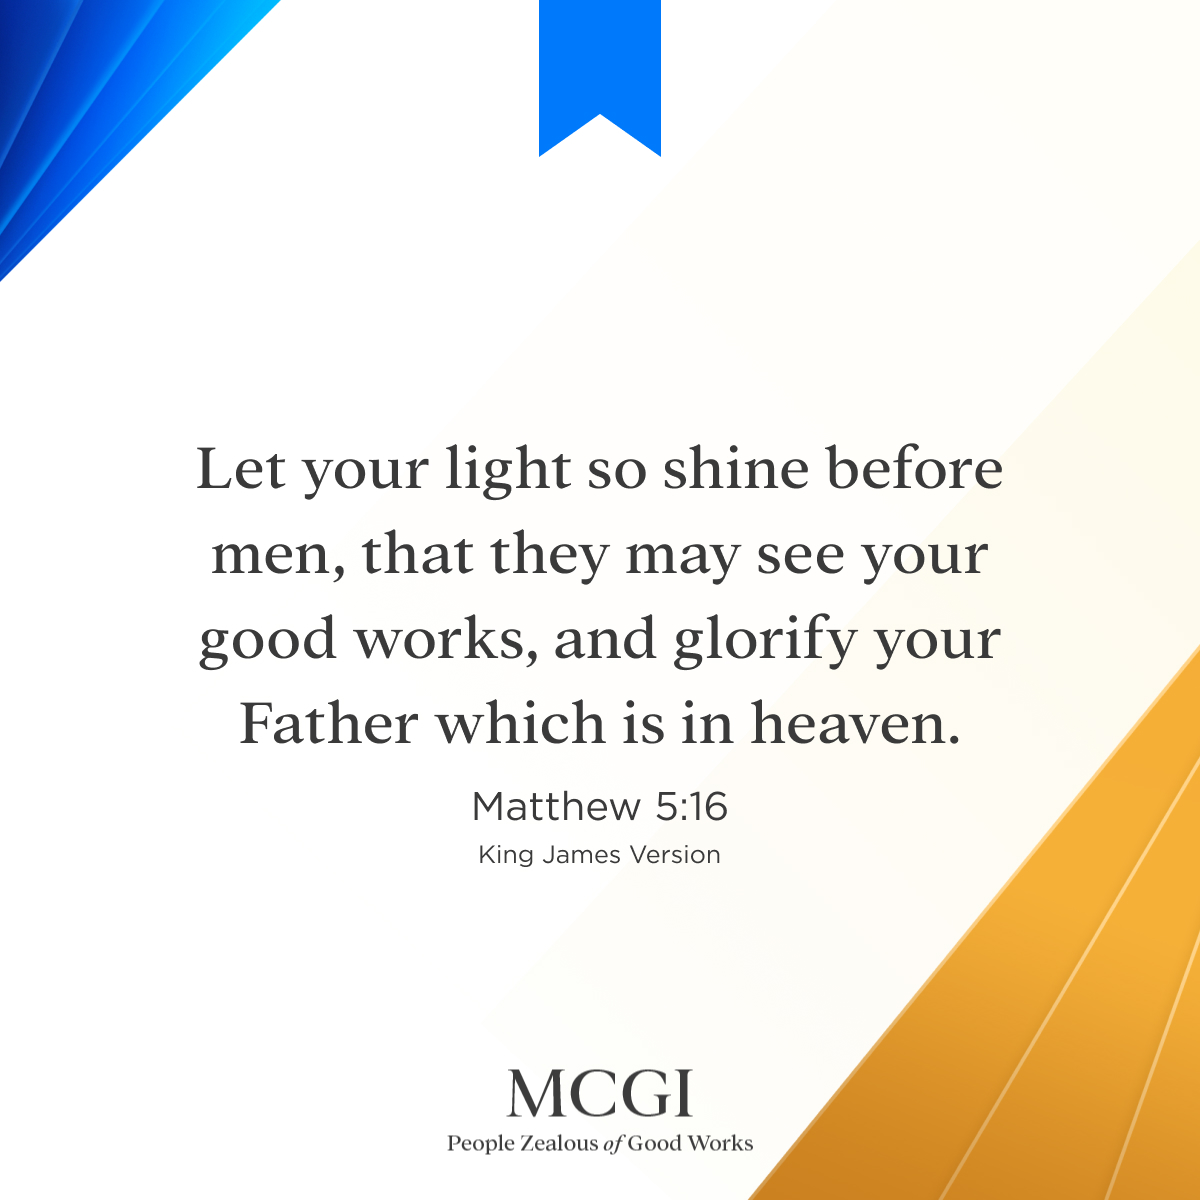 Let your light so shine before men, that they may see your good works, and glorify your Father which is in heaven.

(Matt. 5:16, KJV)

#MCGIFaithHopeLove
#MCGICares